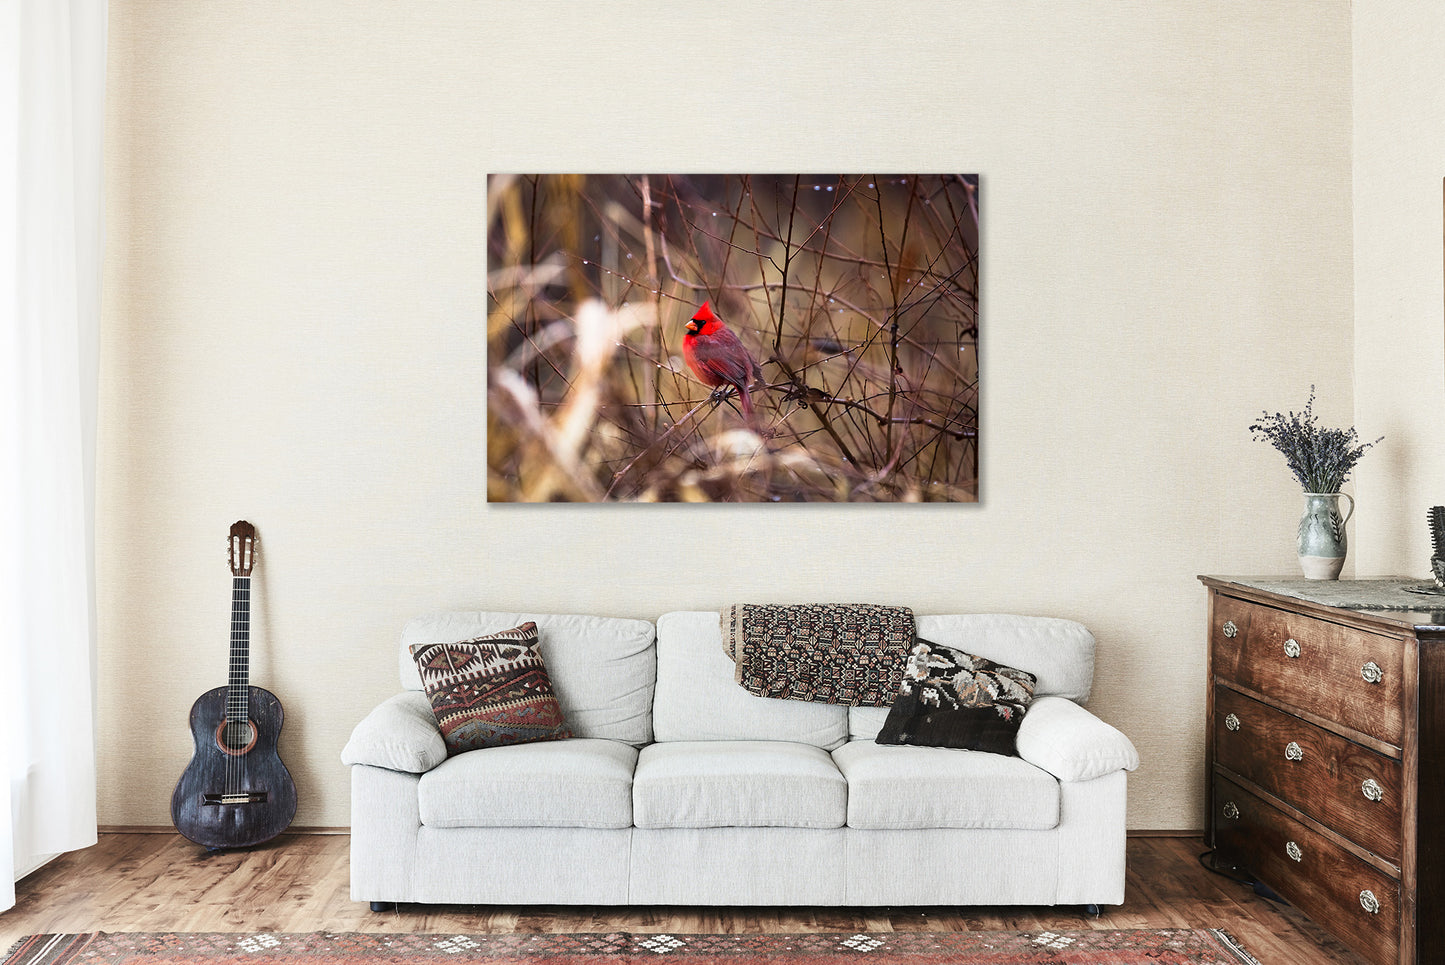 Metal Print Wall Art - Picture of Red Cardinal on Branch Surrounded by Raindrops on Winter Day in Oklahoma - Bird Photo Artwork Decor